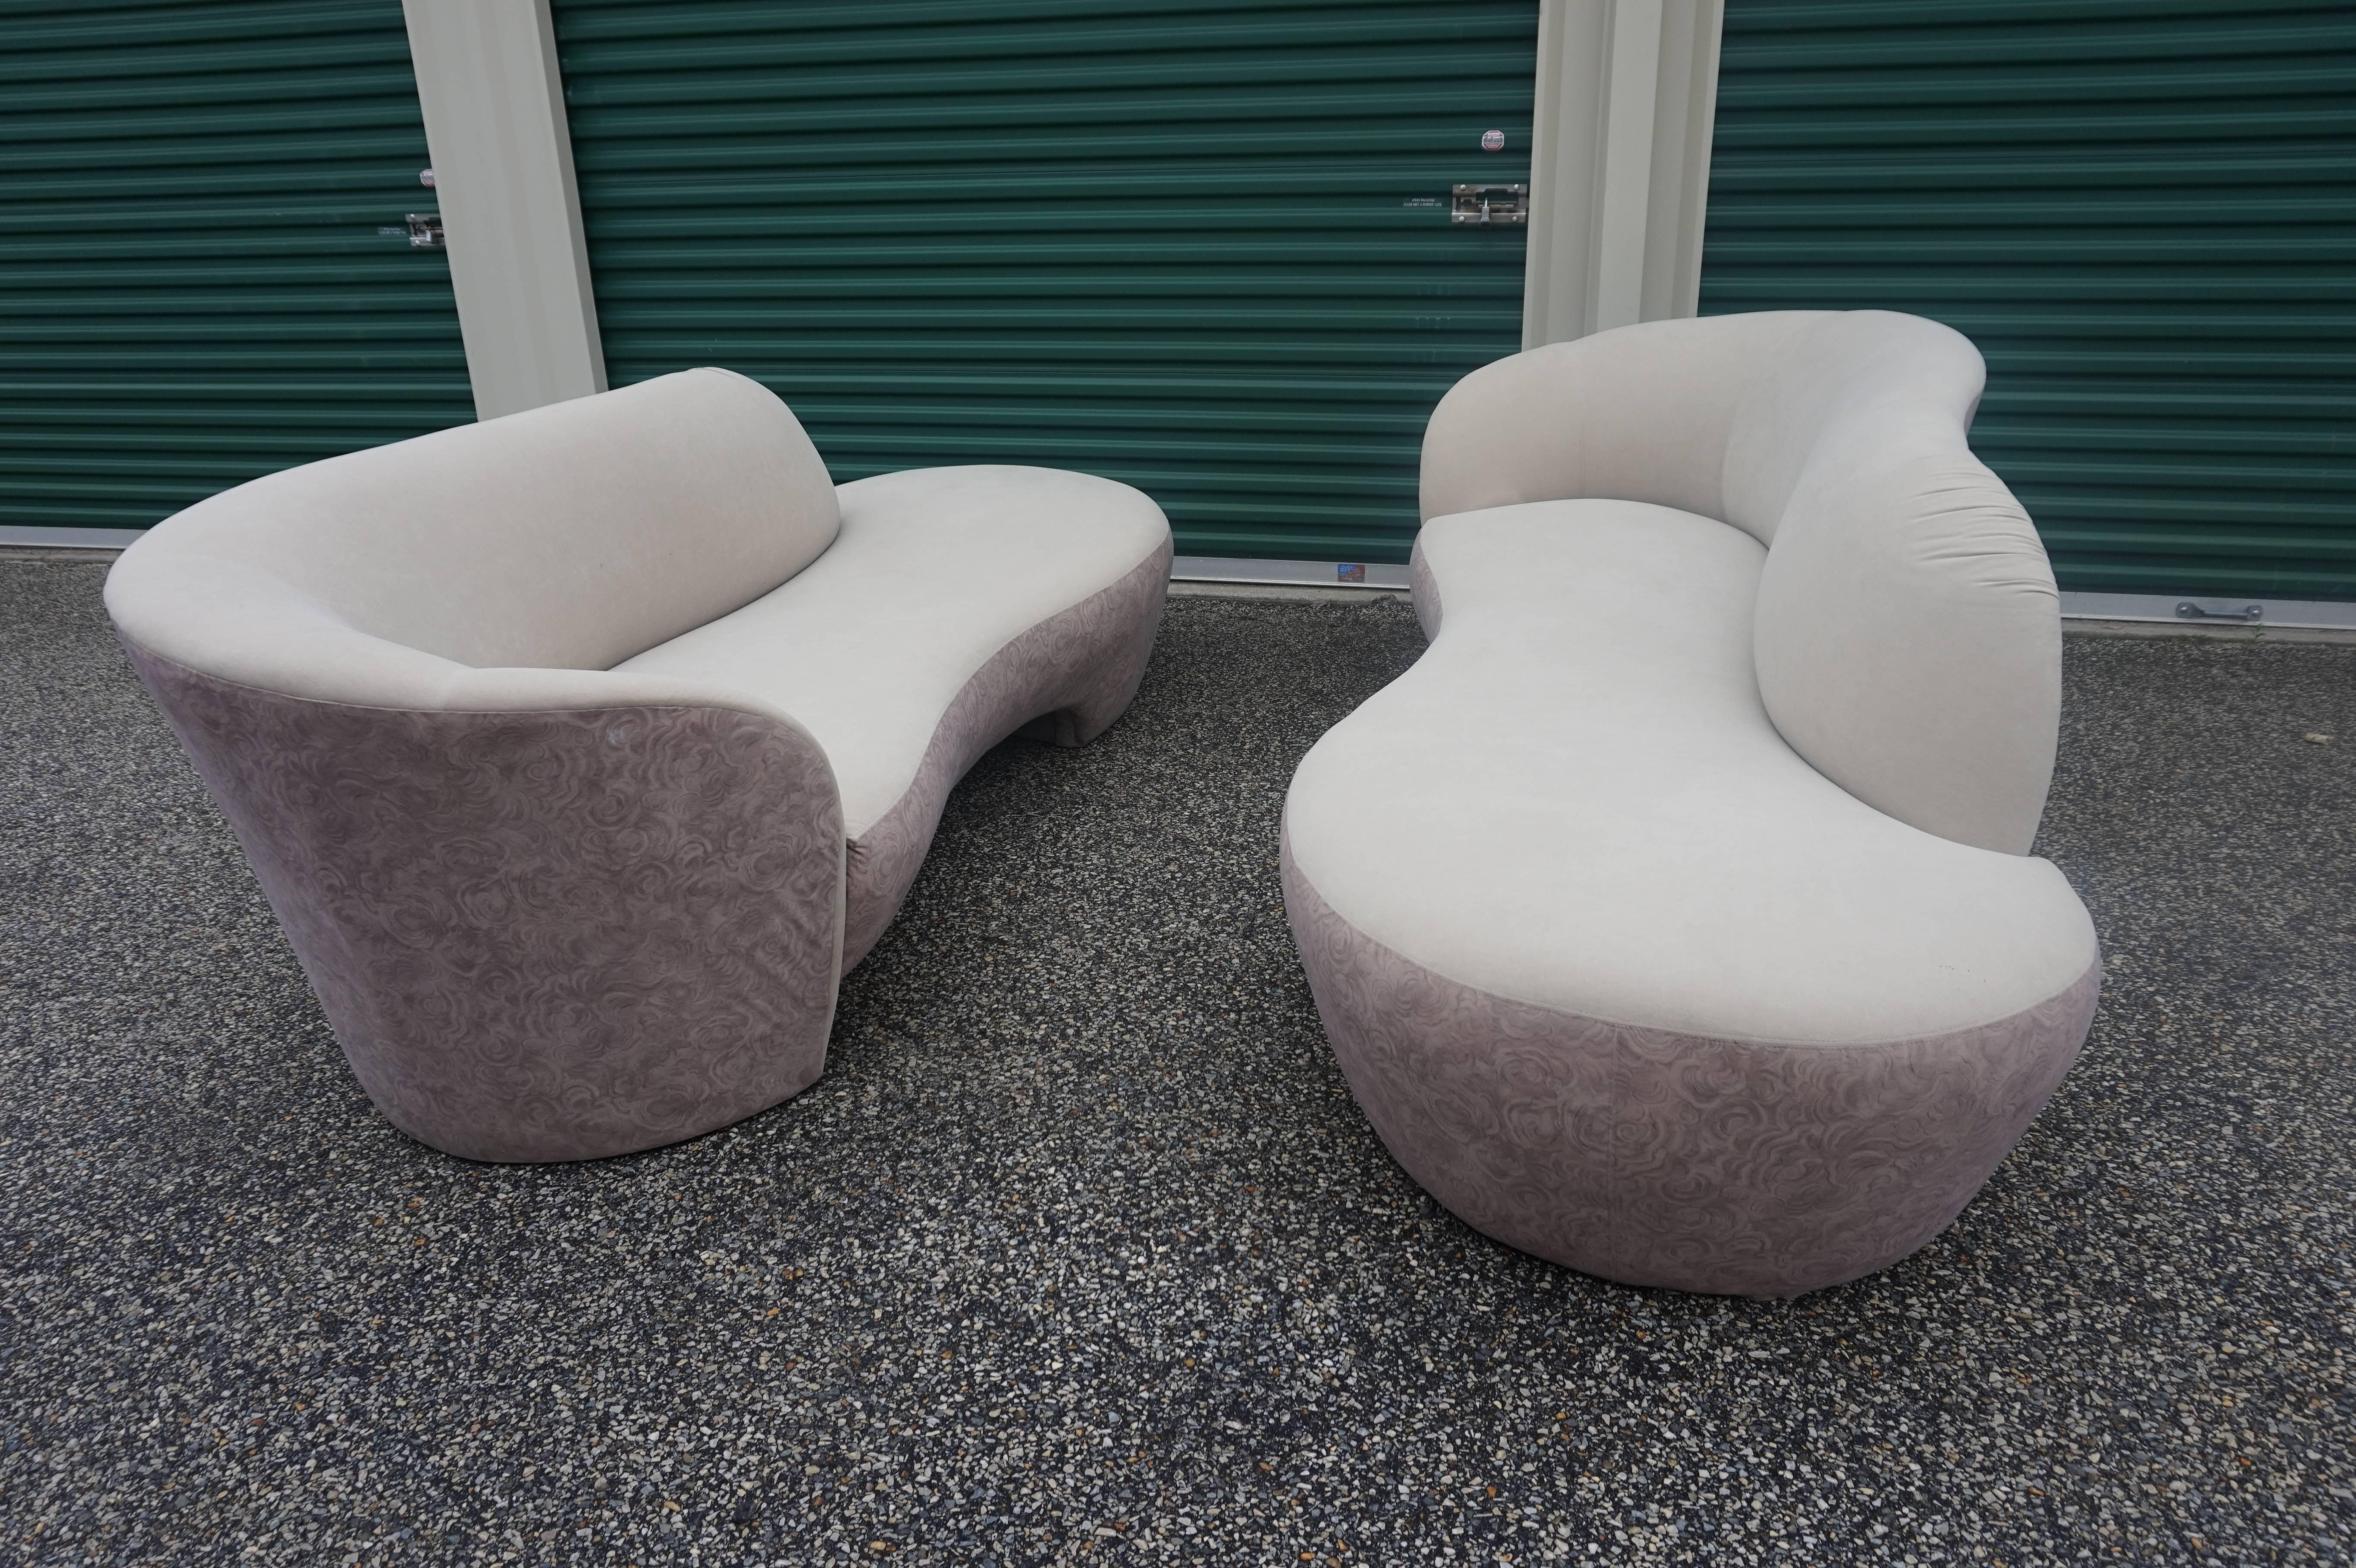 Gorgeous pair of Vladimir Kagan style Weiman Preview kidney shaped sofas. Both have the arm on the left and look amazing placed across from each other.